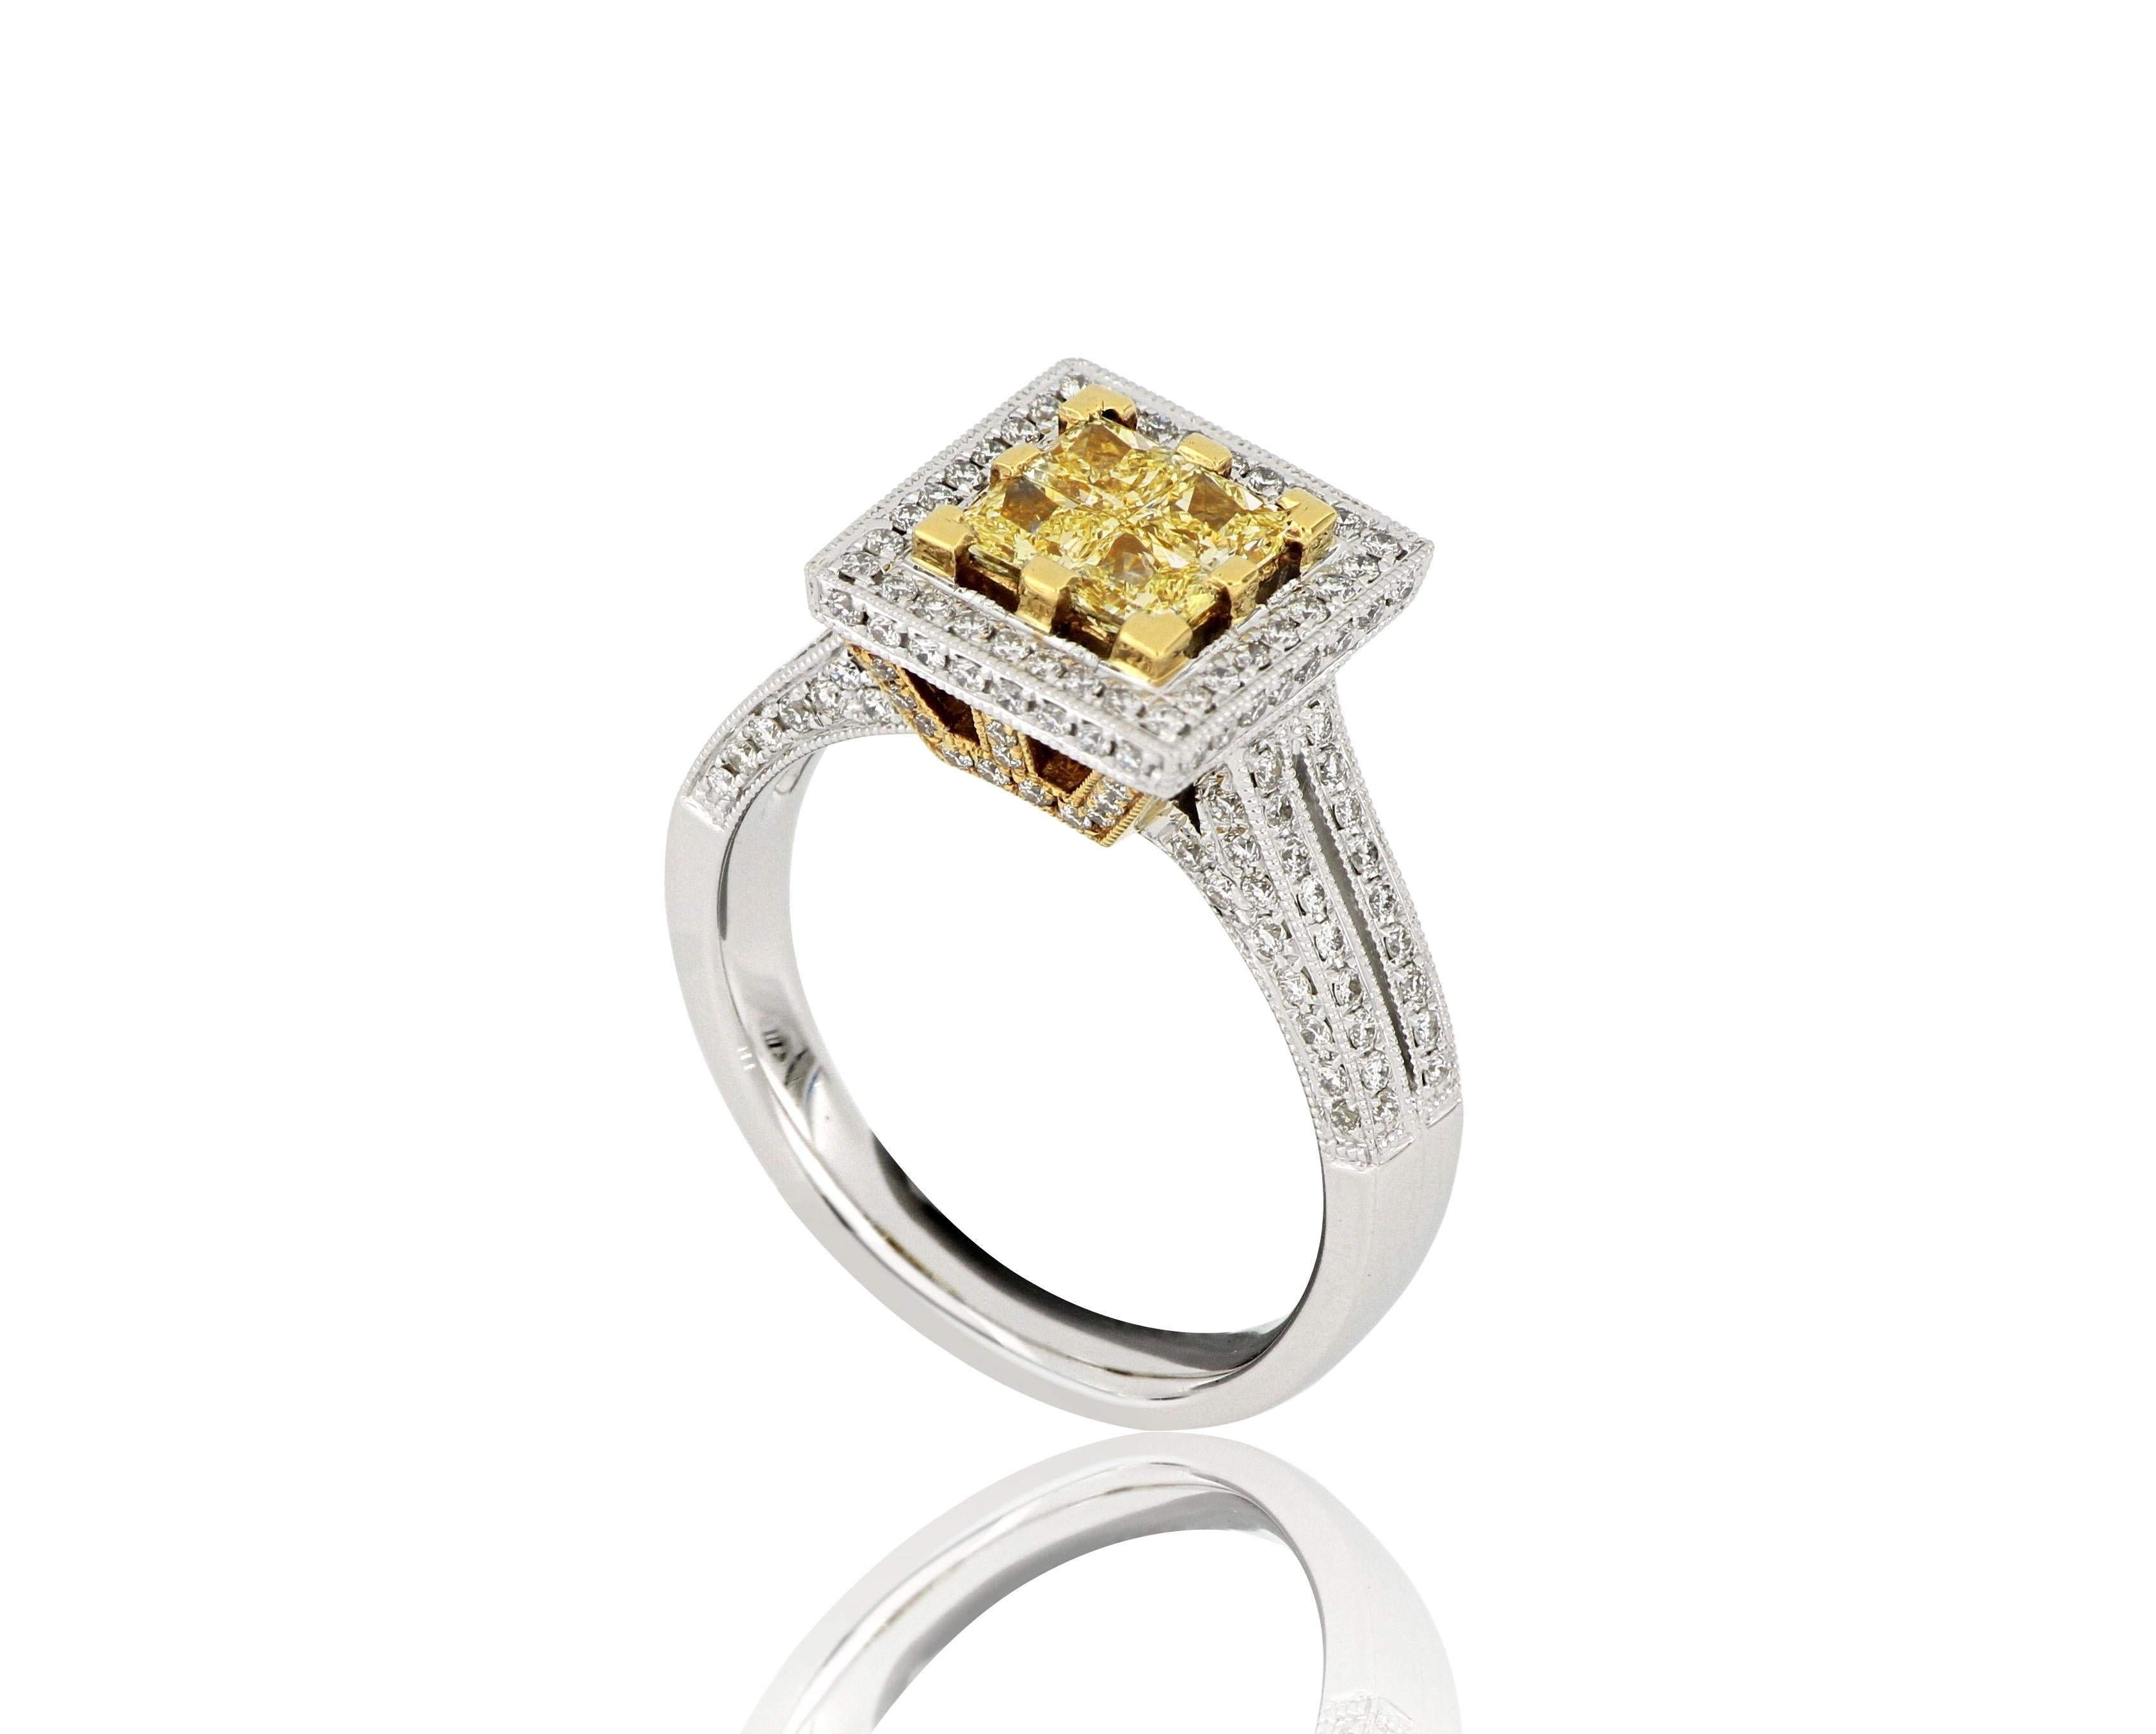 A diamond ring, set with squared-cut natural  yellow diamonds weighing approximately 0.62 carats, flanked by brilliant-cut white diamonds weighing approximately 0.56 carats, mounted in 18  Karat white gold.
O’Che 1867 was founded one and a half